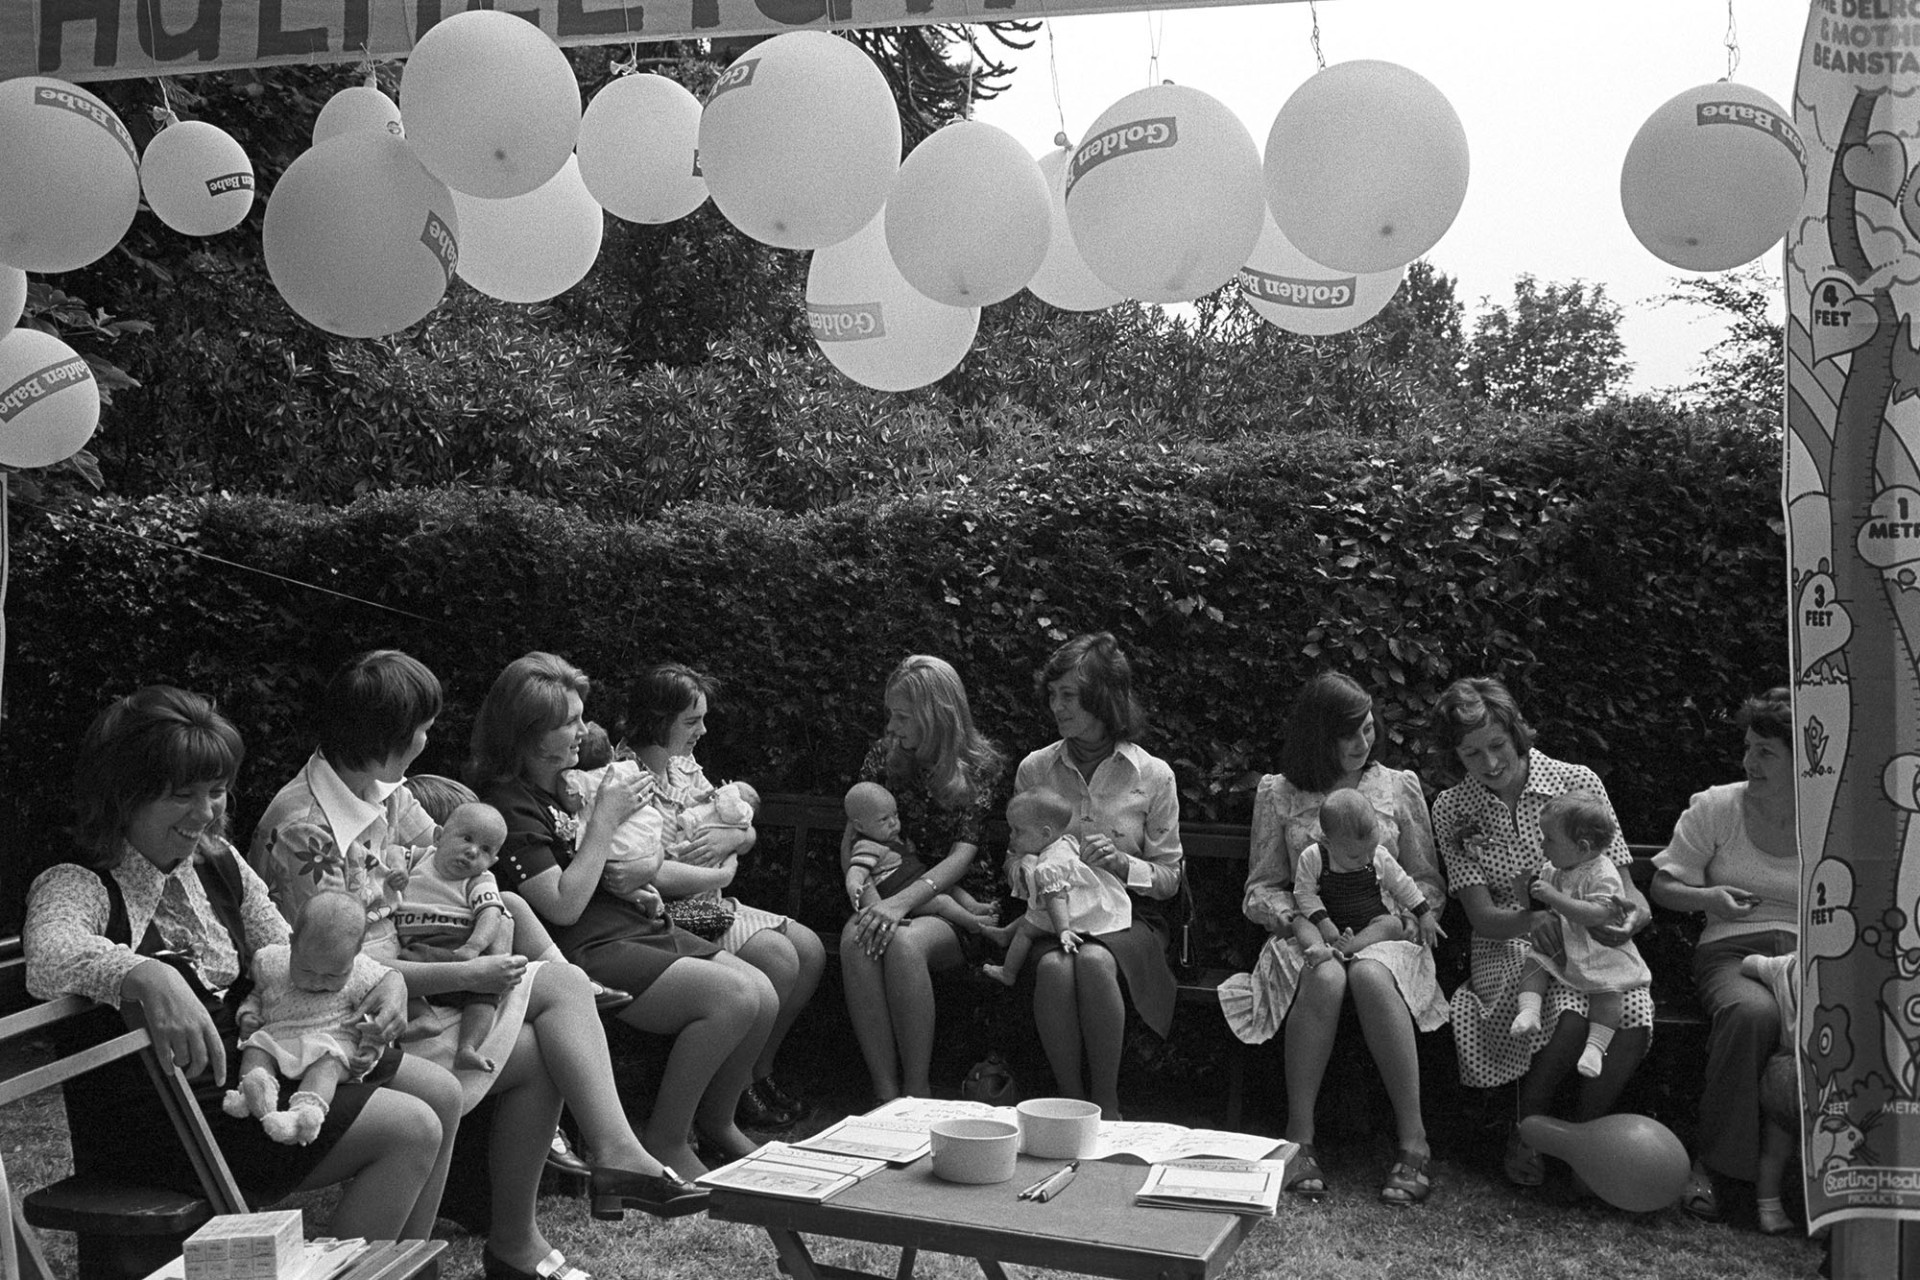 Church Garden Party, mothers and babies at baby show, balloons.
[Mothers and babies seated beneath balloons at the Chulmleigh Church Garden Party baby show in the grounds of Chulmleigh Vicarage.]